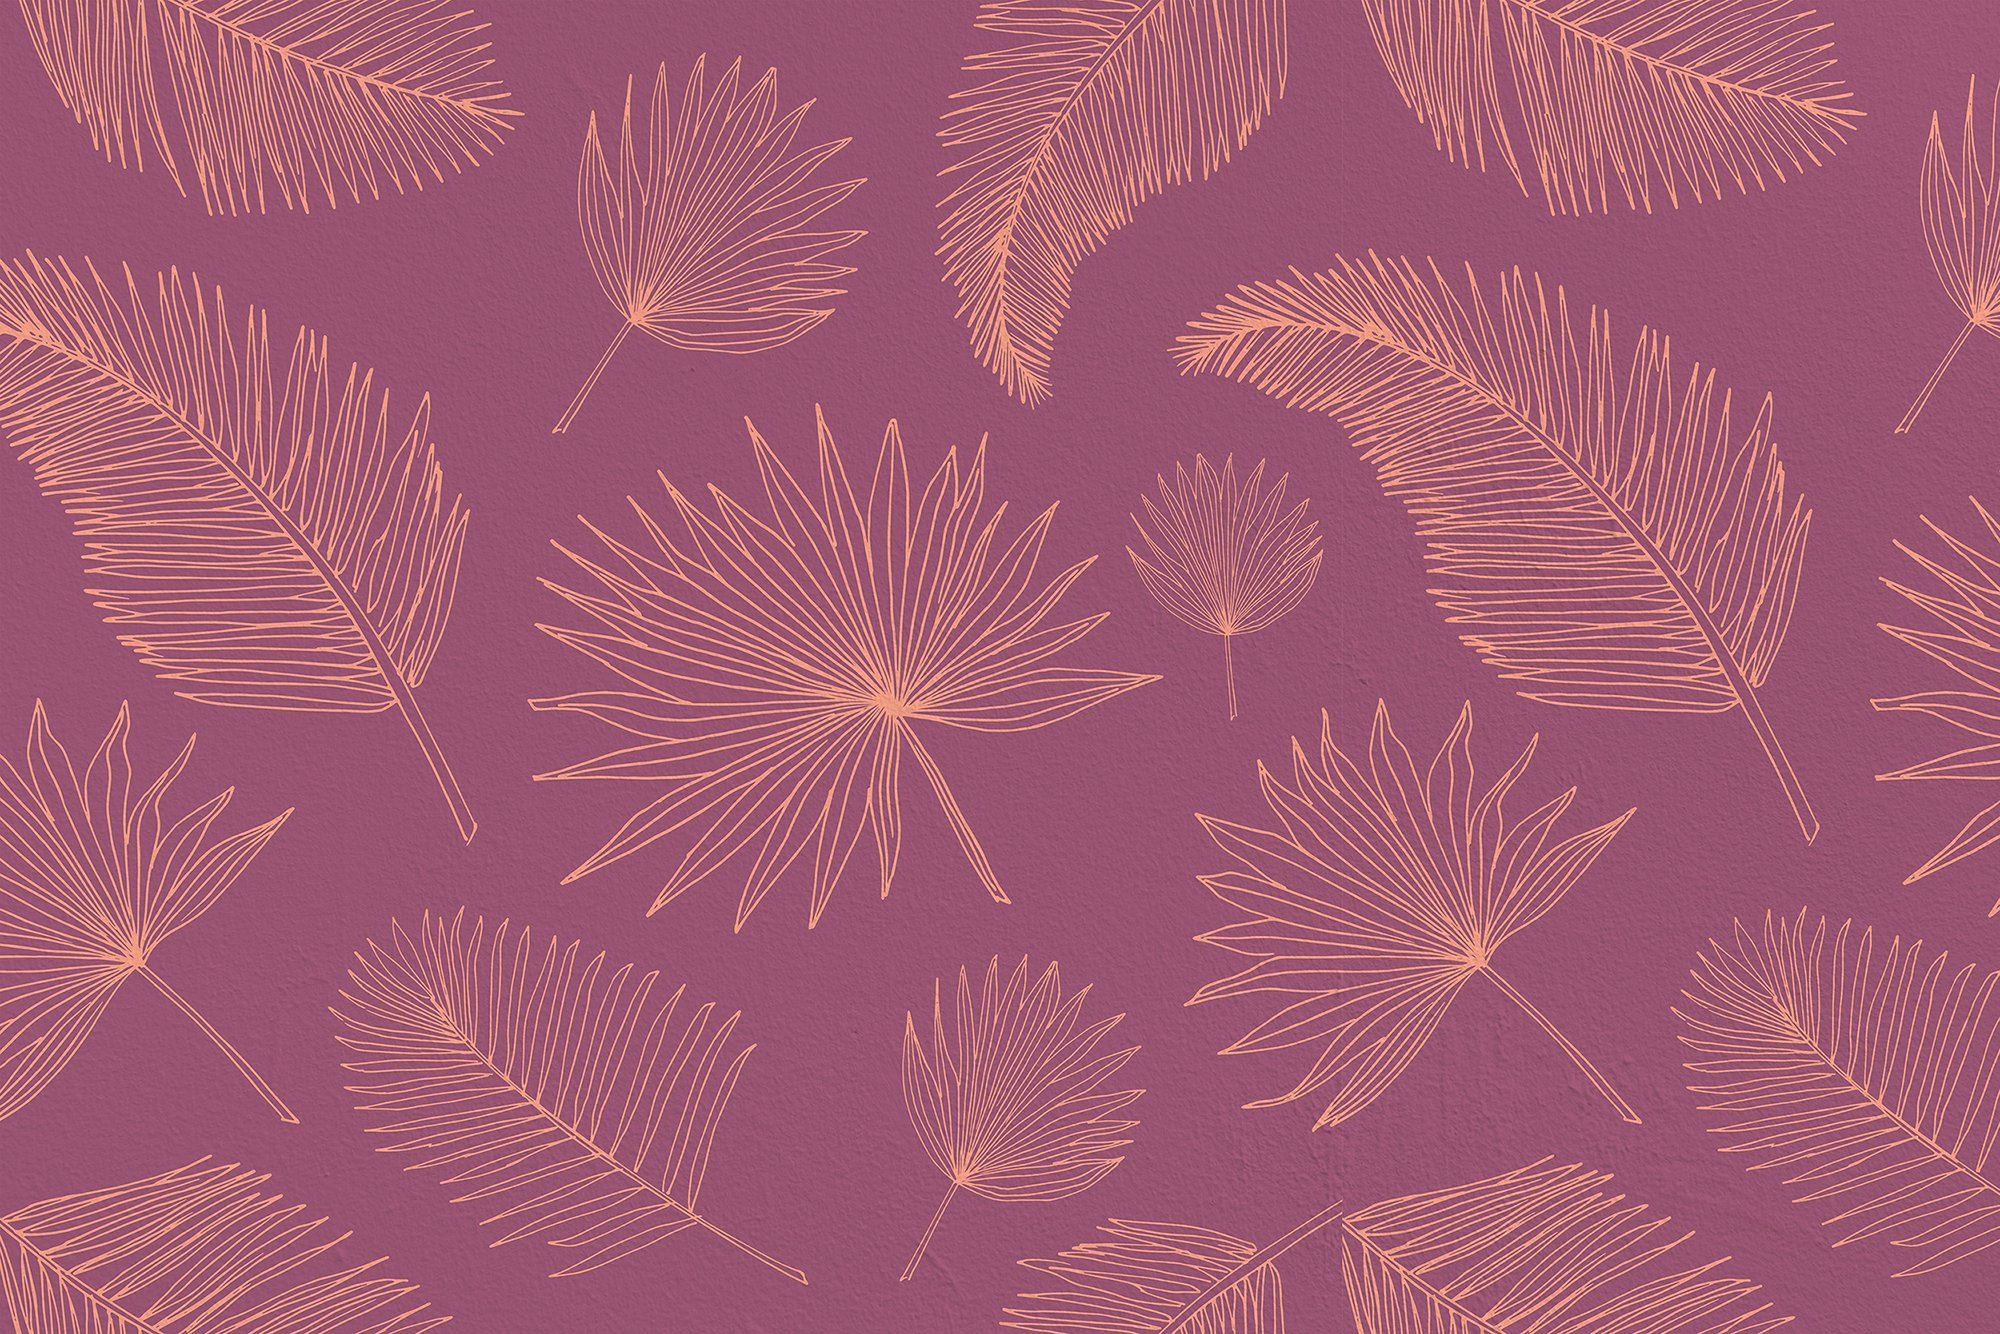 Bunch of palm leaves on a purple background.